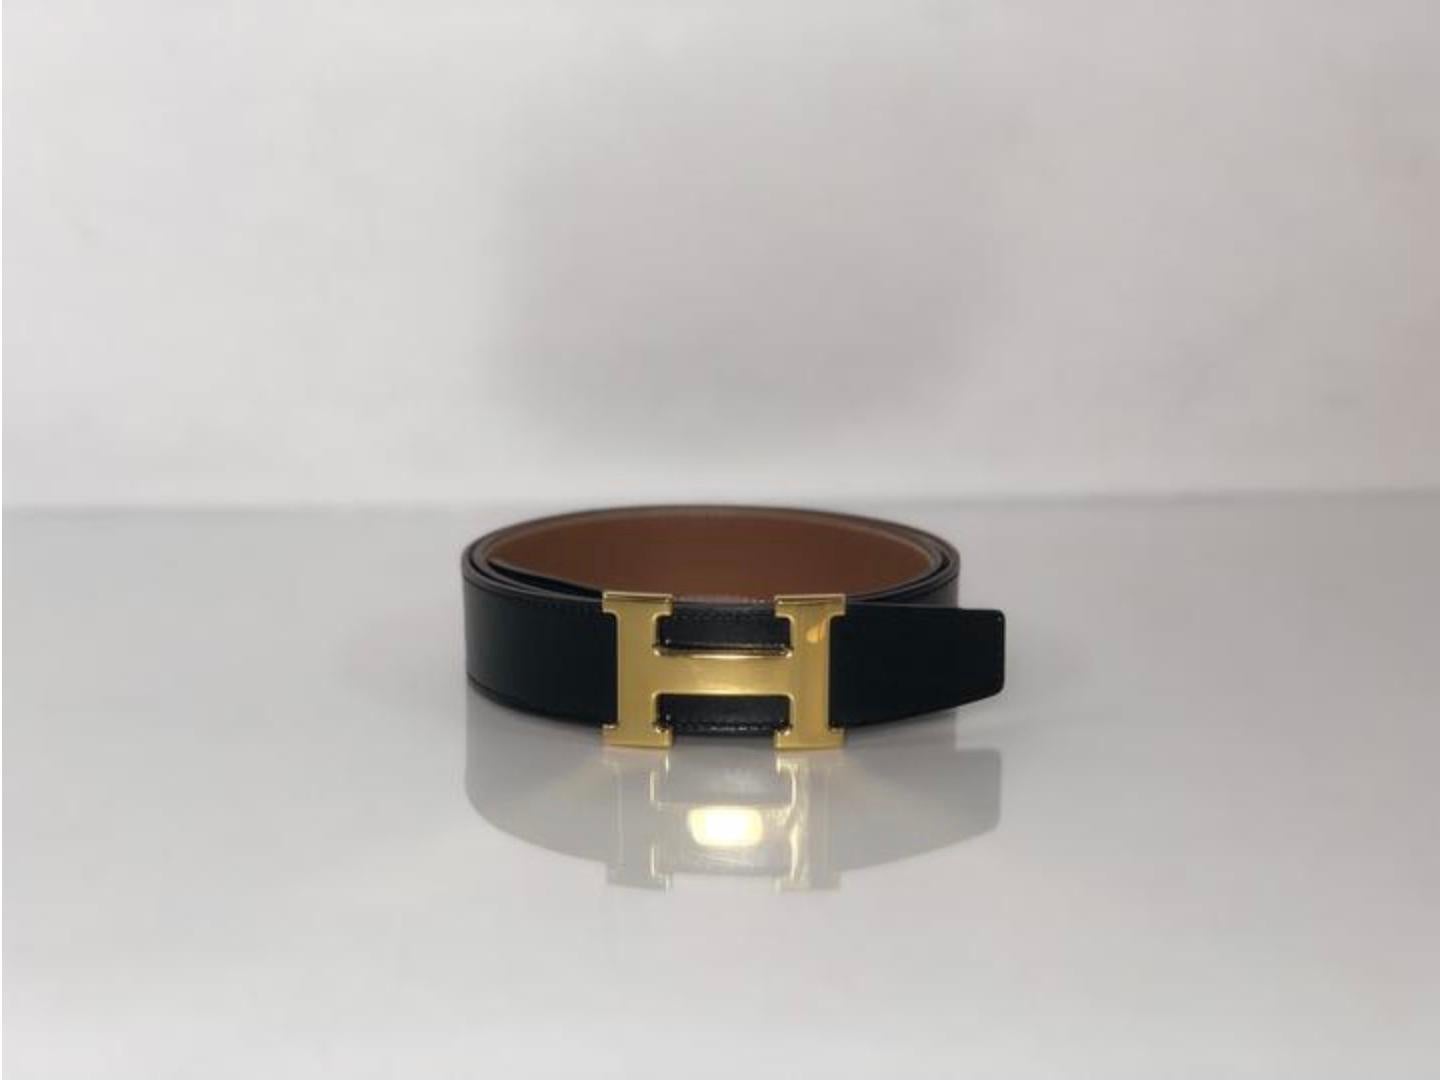 MODEL - Hermes Reversible Black and Brown H Belt with Polished Gold H Buckle 85cm

CONDITION - Exceptional! Light Feather Scuffing on Belt Buckle.

SKU - 2761

ORIGINAL RETAIL PRICE - 1000 + tax

DATE/SERIAL CODE - 85cm CAA 020 ZA

ORIGIN -